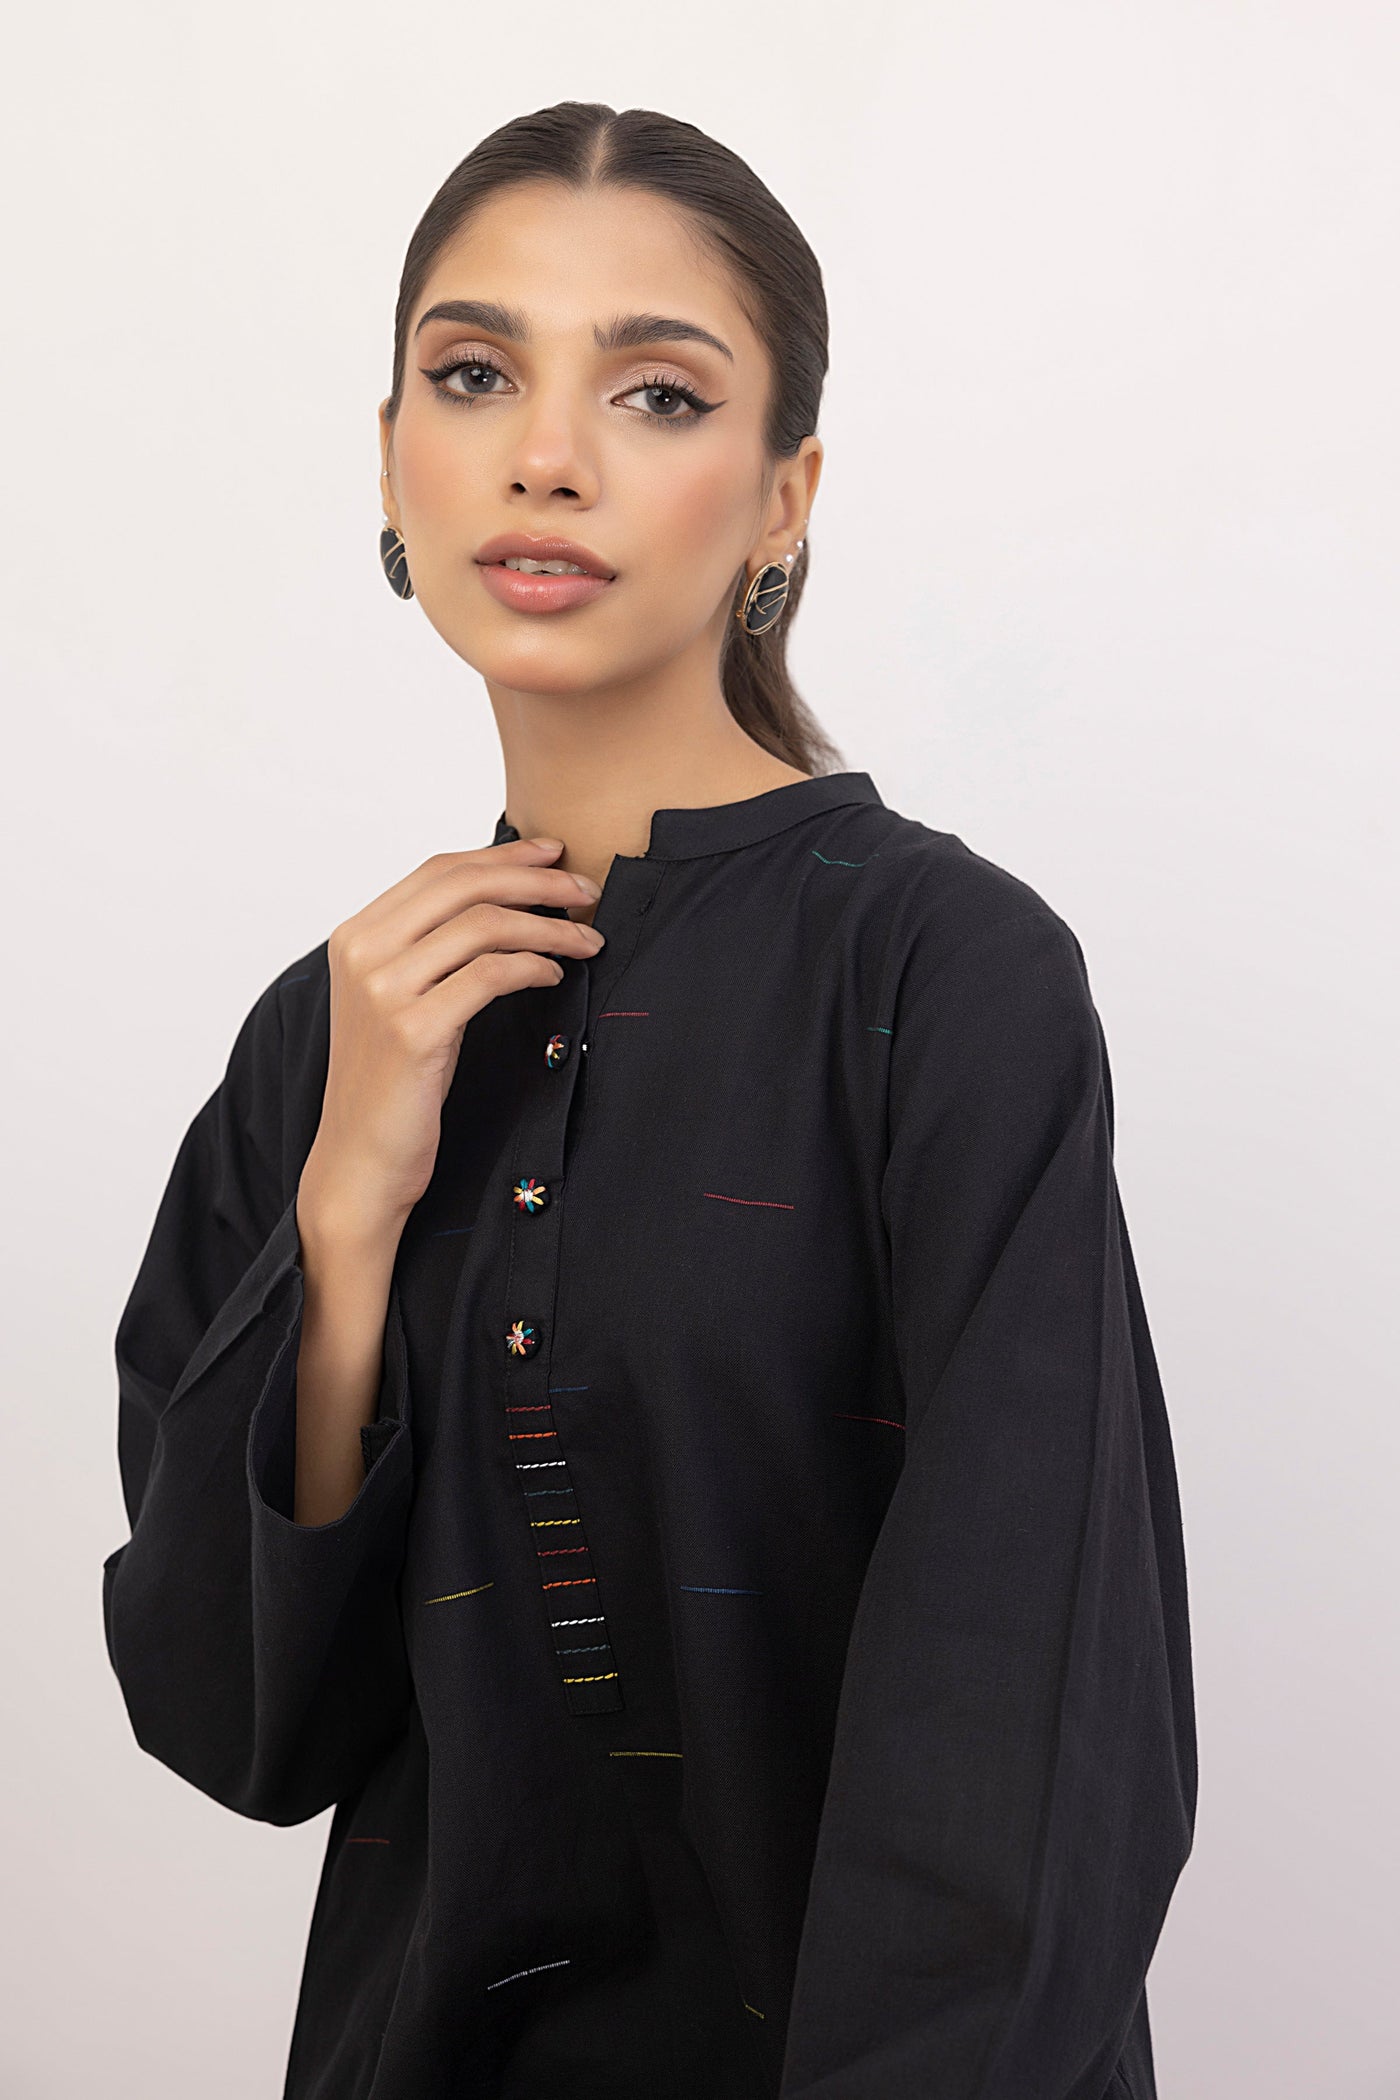 Lakhany 01 Piece Ready to Wear Yarn Dyed Cotton Embroidered Shirt - LG-IZ-0143